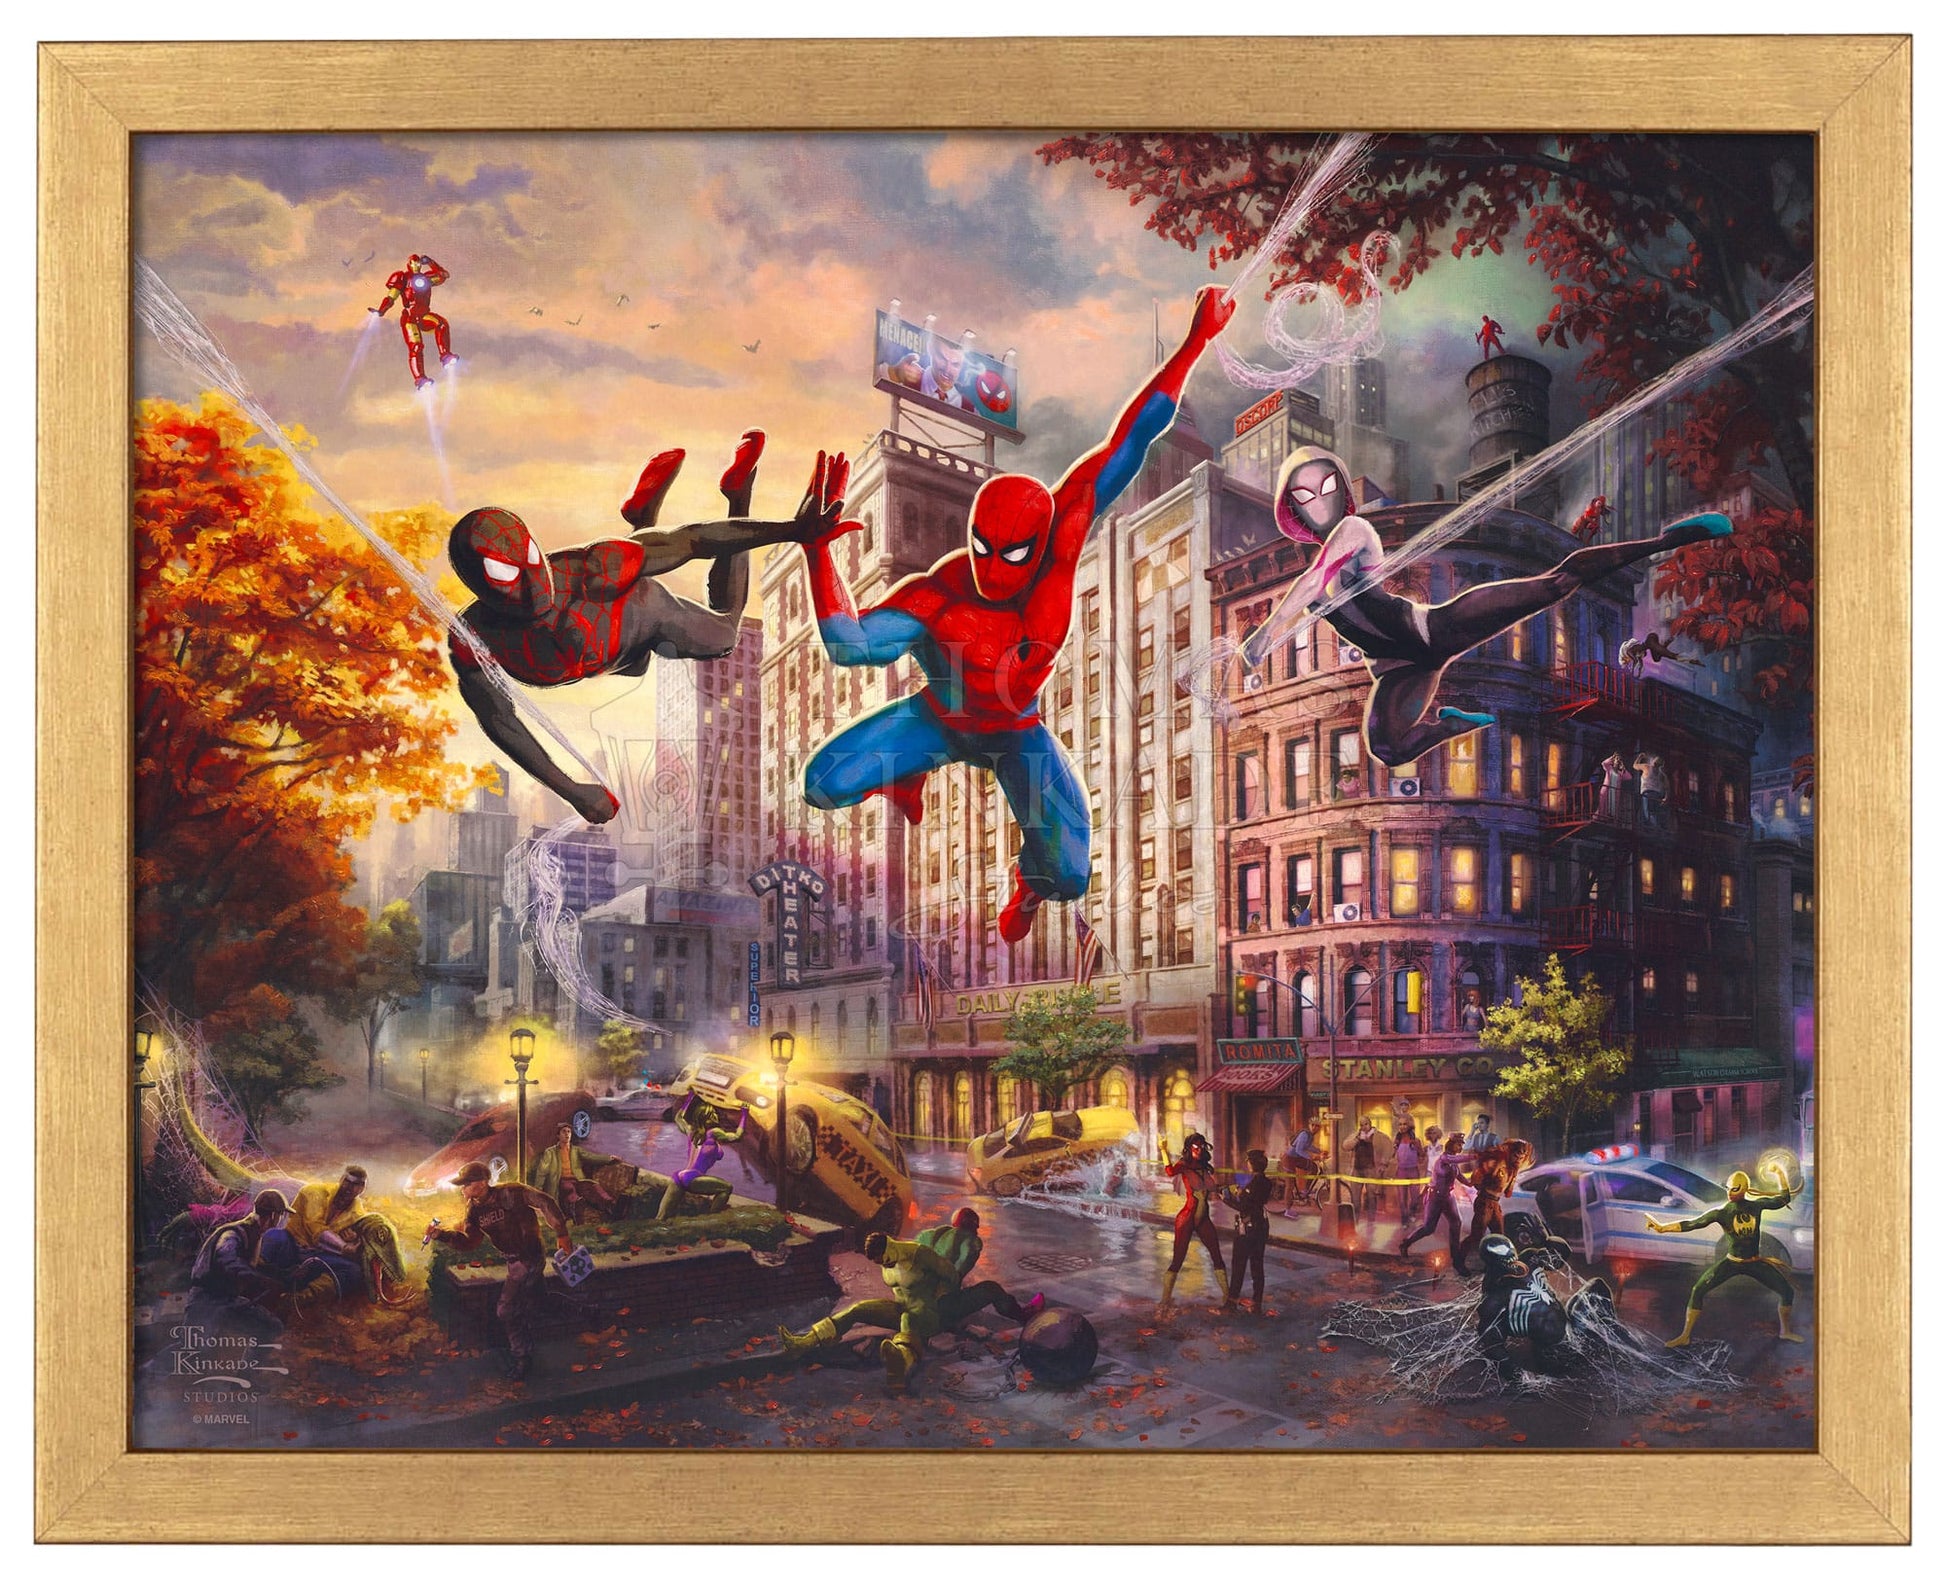 Spidey And His Amazing Friends - Marvel Poster (Spider-Man) (Size